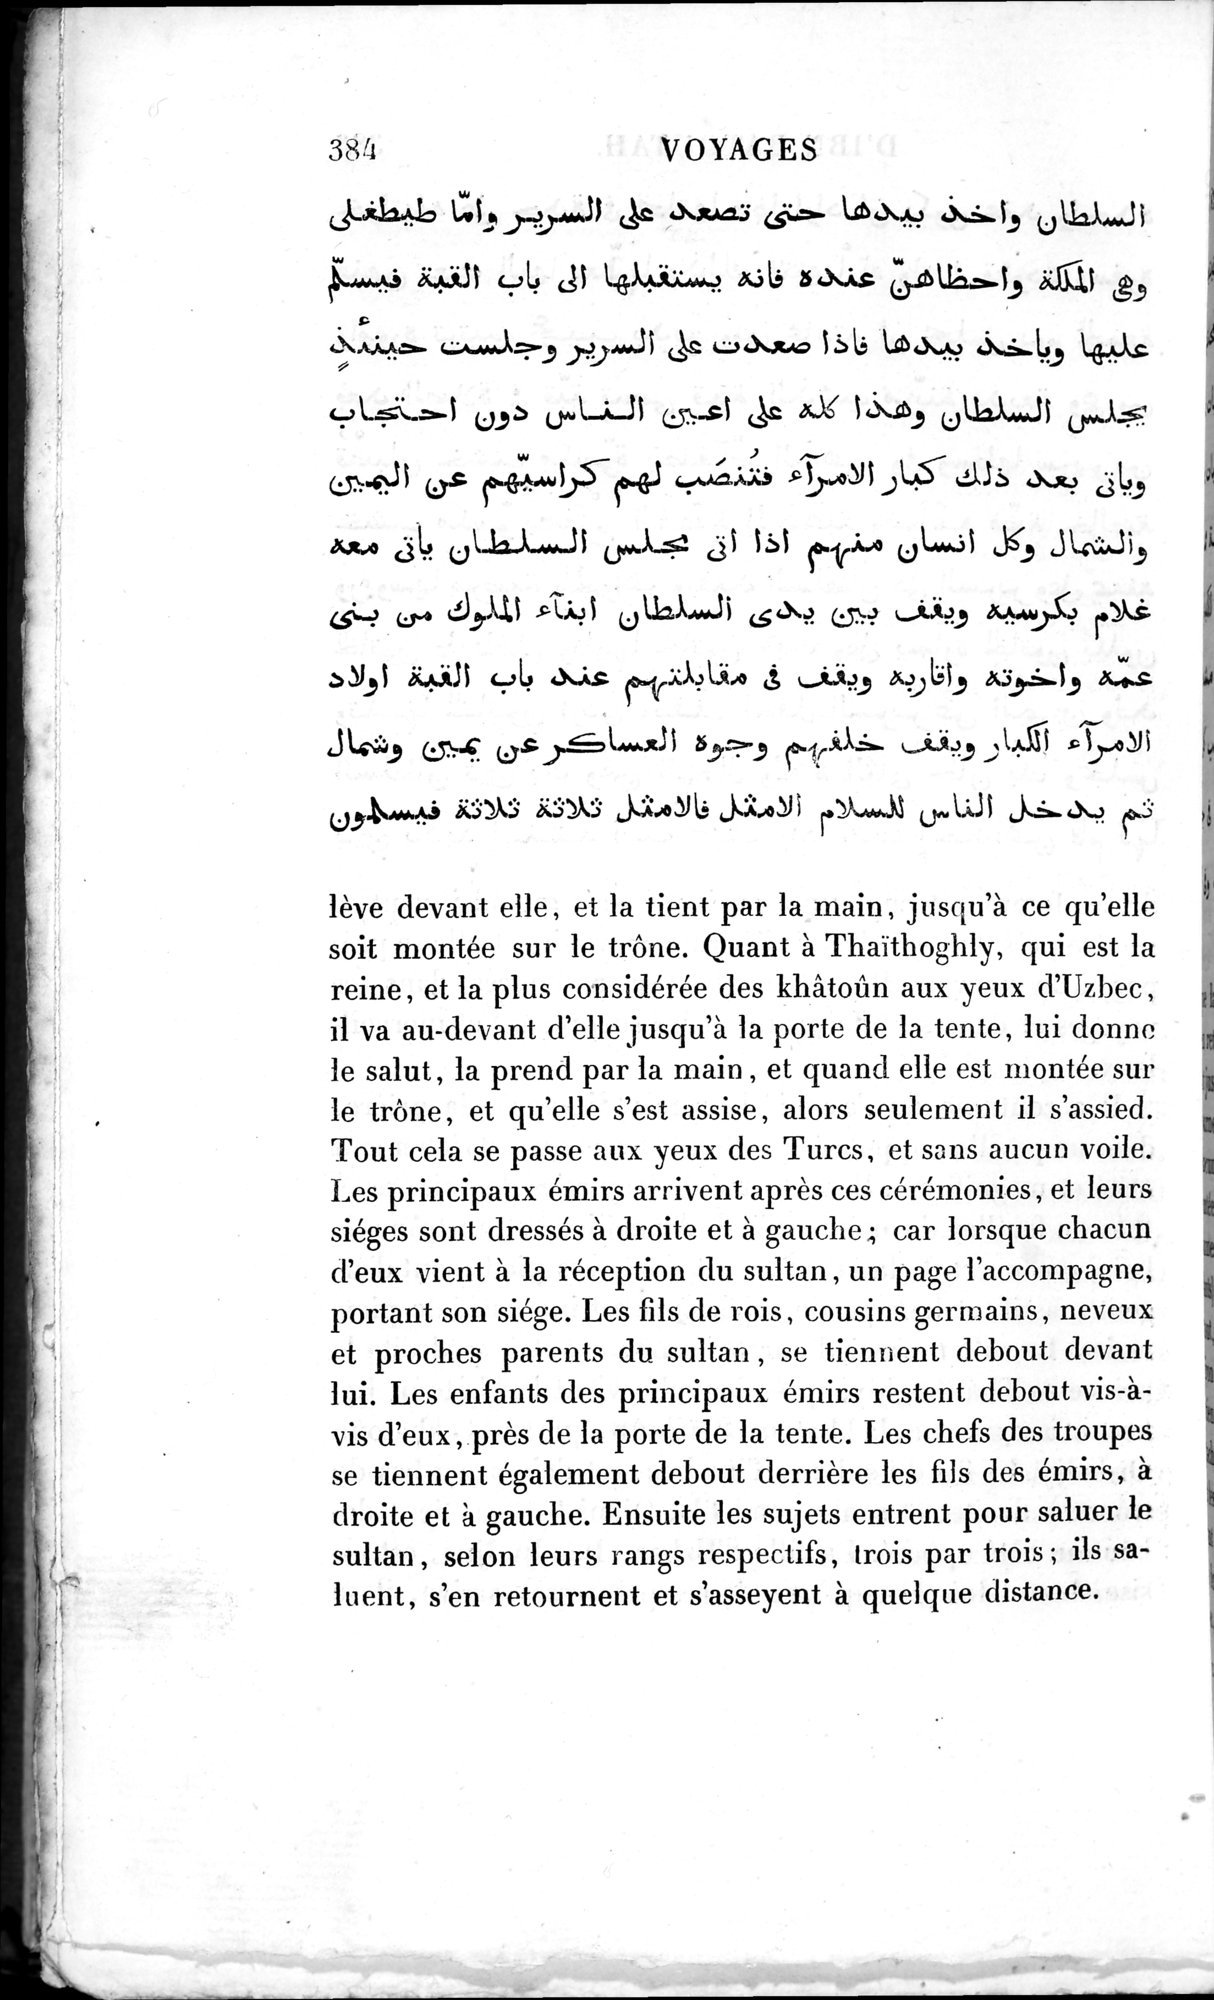 Voyages d'Ibn Batoutah : vol.2 / Page 412 (Grayscale High Resolution Image)